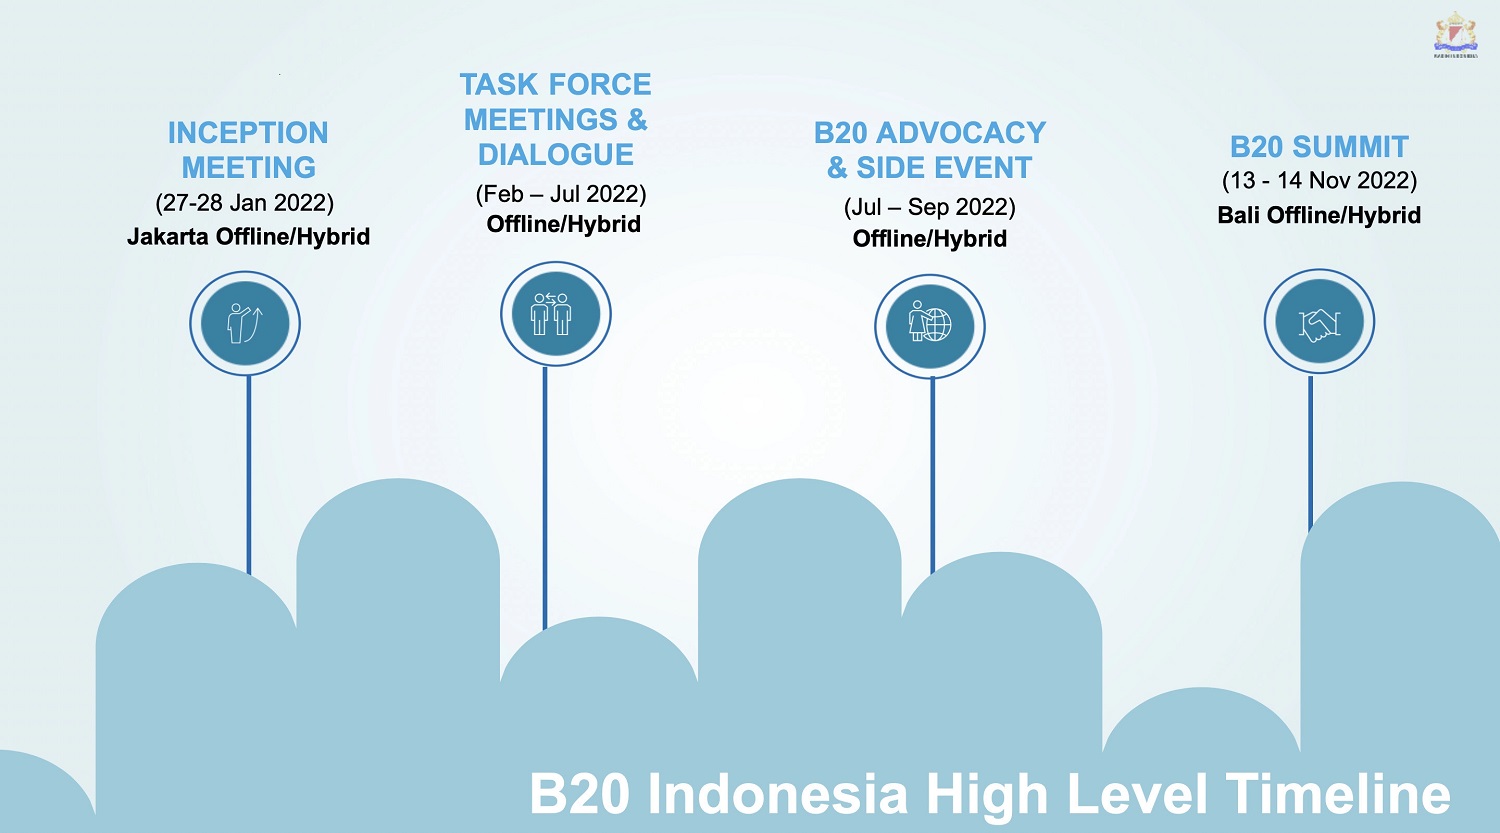 The Business Indonesia 2022 High-Level Timeline